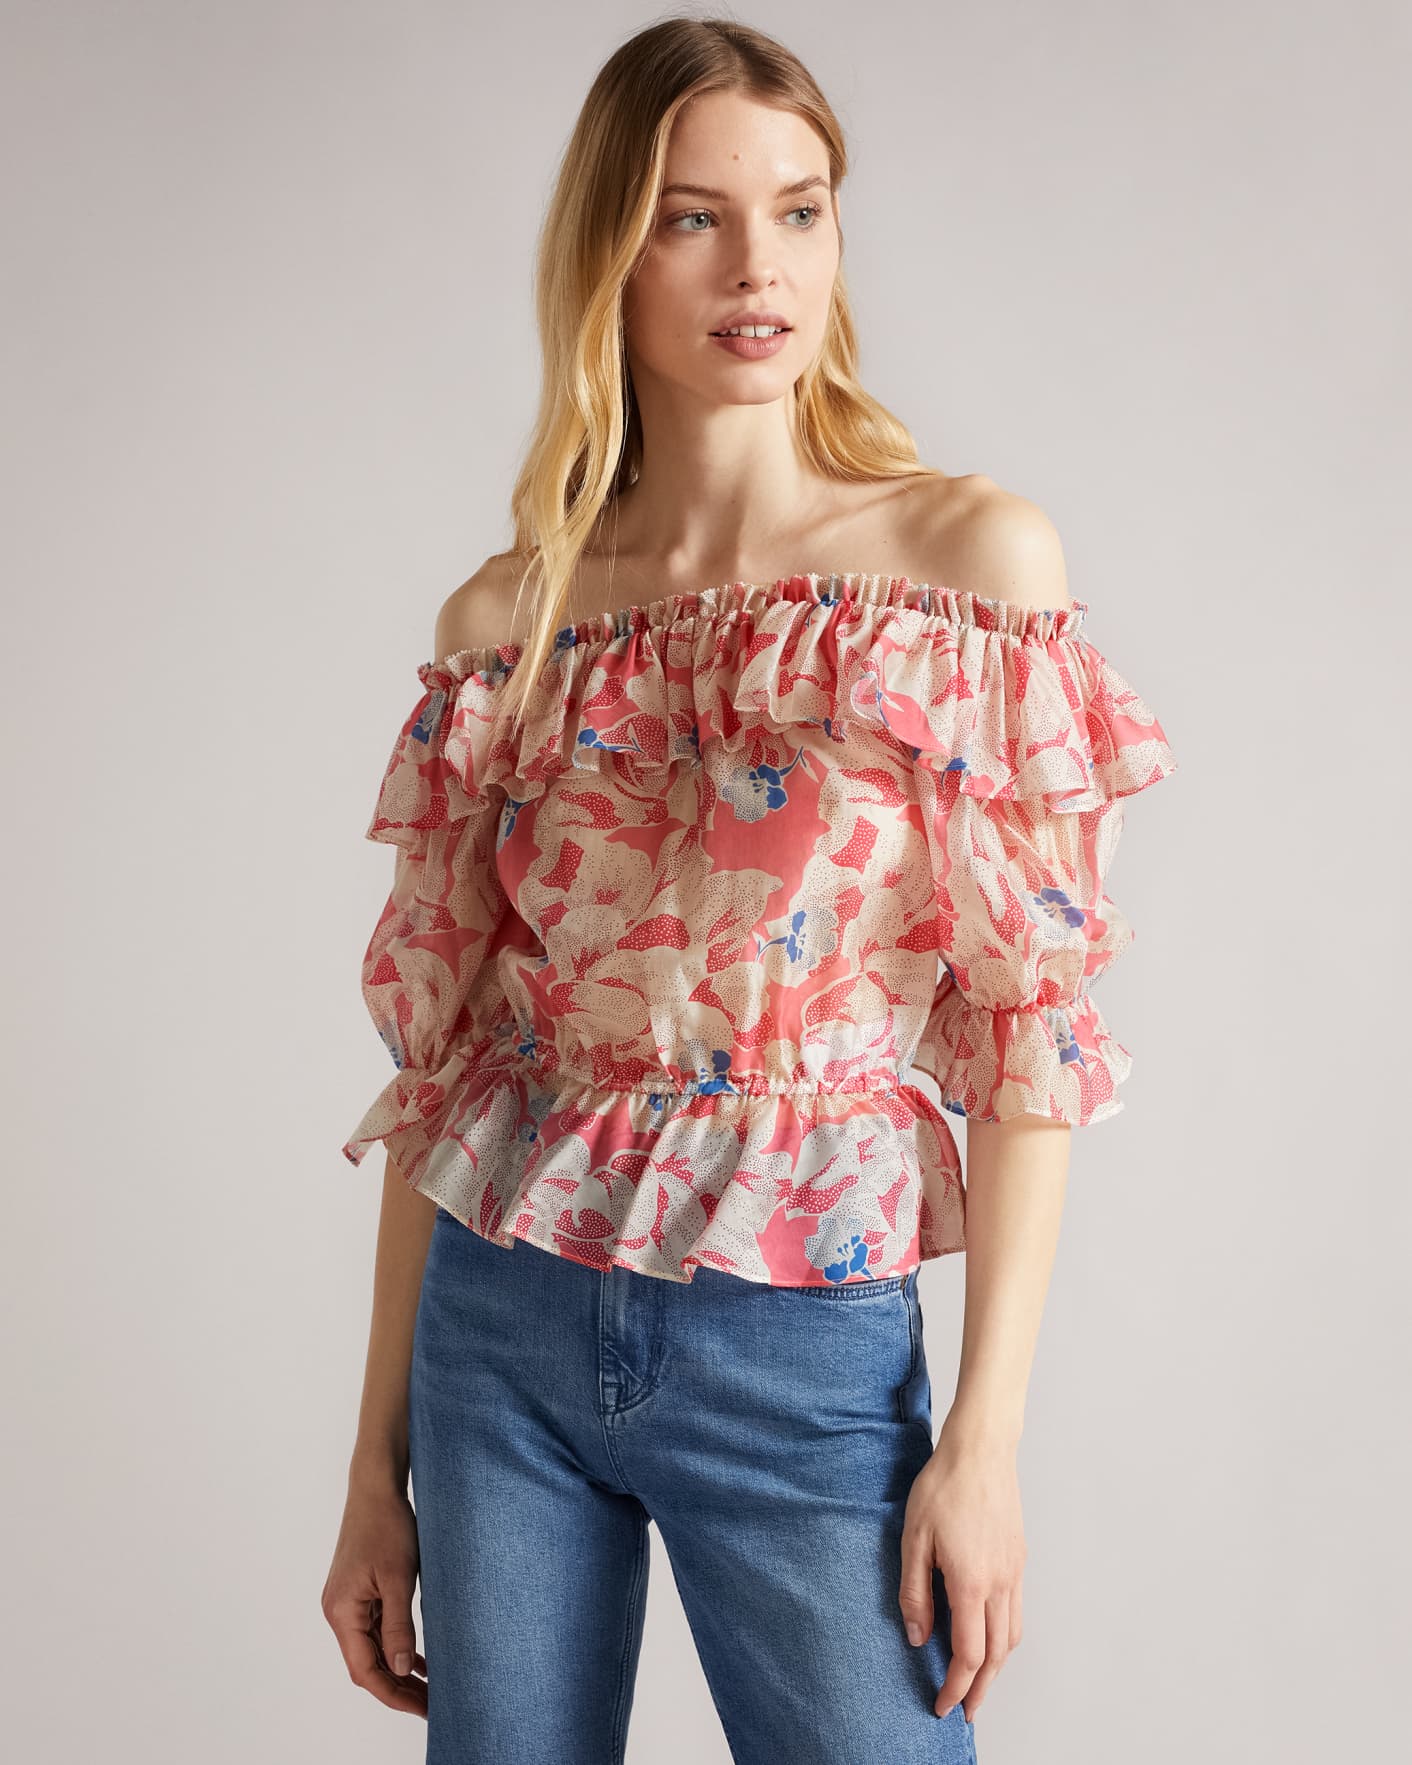 Medium Pink Off The Shoulder Top With Elasticated Waist Ted Baker